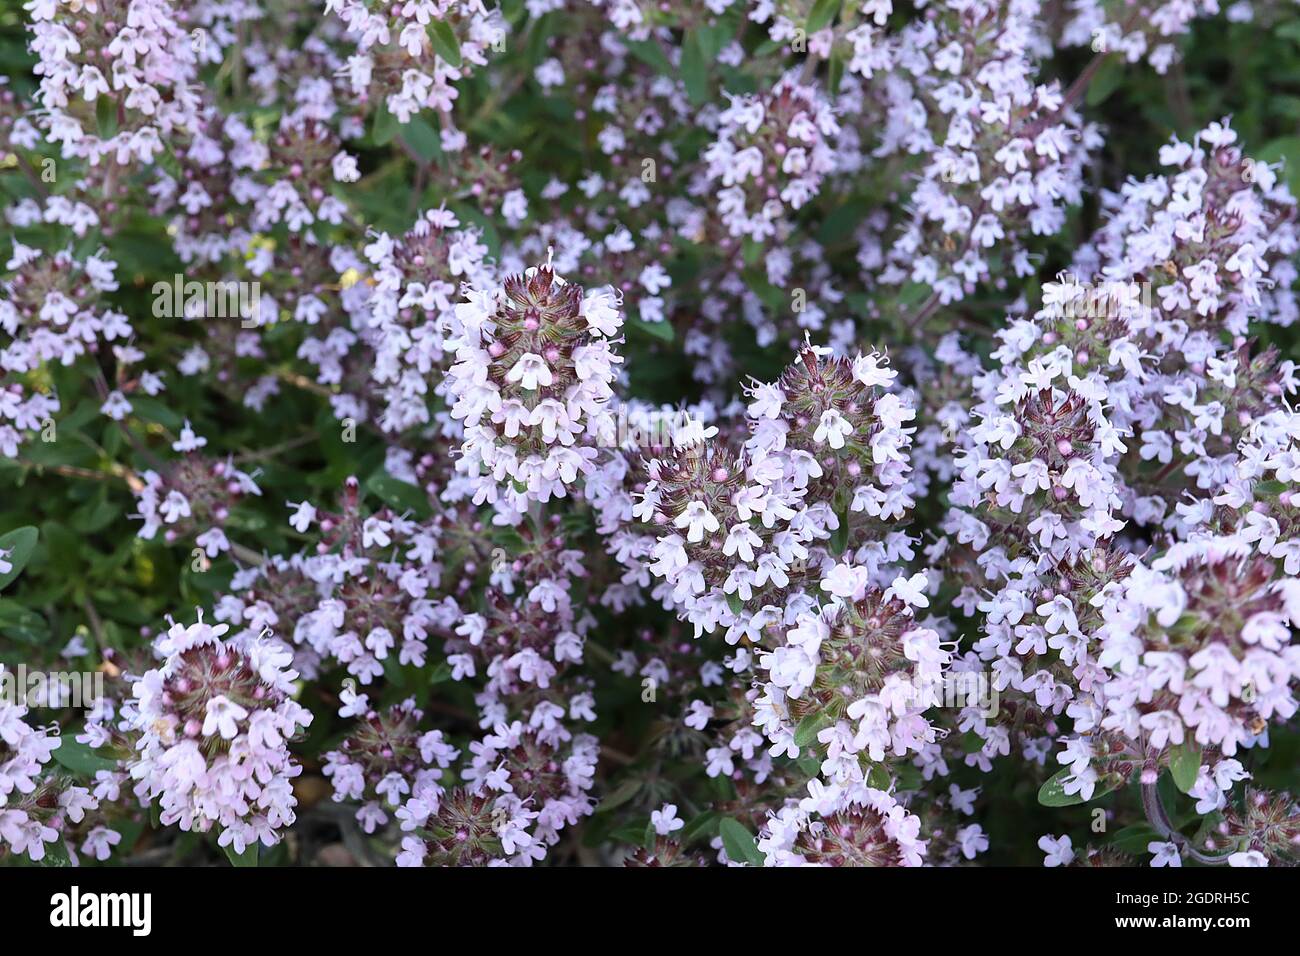 Thymus sibthorpii Sibthorp thyme – conical clusters of tiny open bell-shaped lavender flowers and small ovate leaves on short stems,  July, England,UK Stock Photo